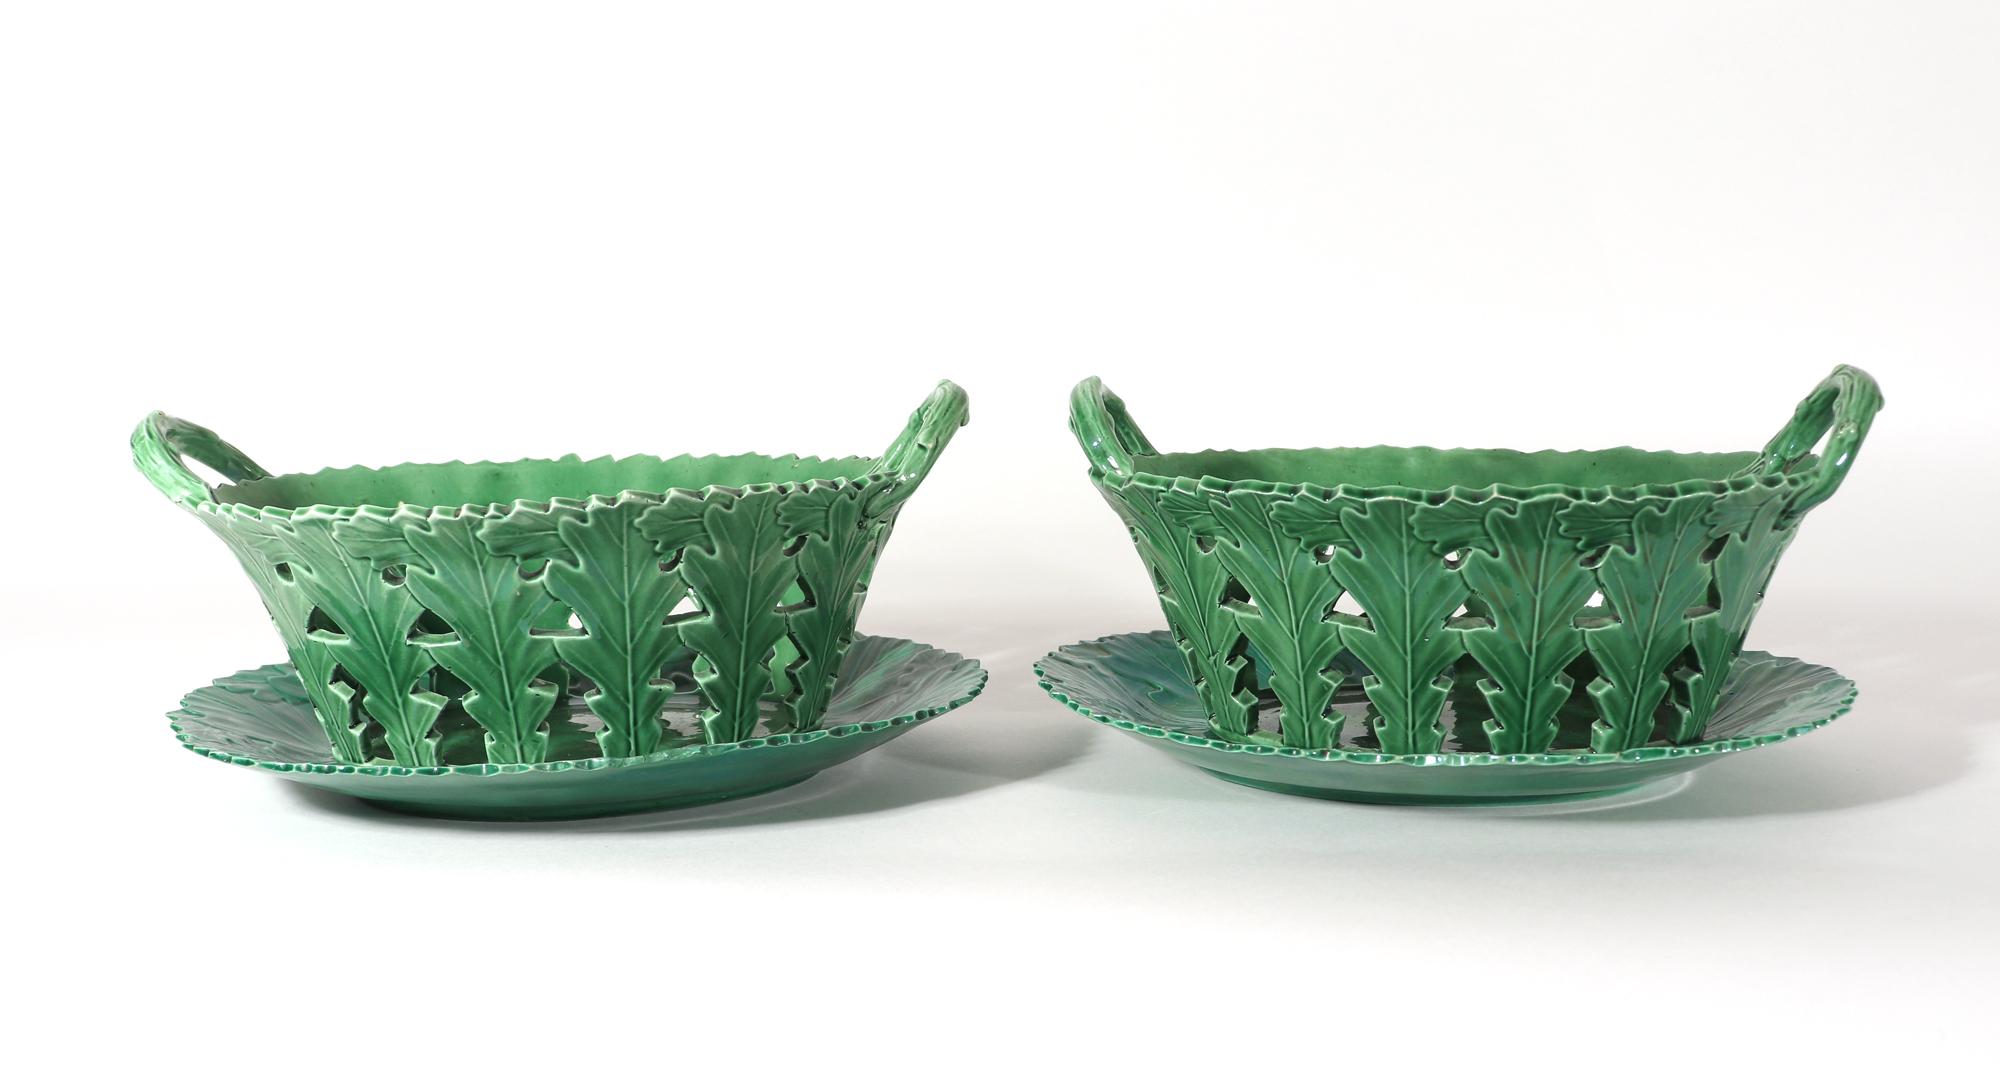 British green glaze oak leaf pottery baskets & stands,
Attributed to attributed to probably West Pans, Scotland, 
probably William Littler,
Circa 1770

The oval greenware baskets and stands have an oak leaf design. The baskets are openwork with